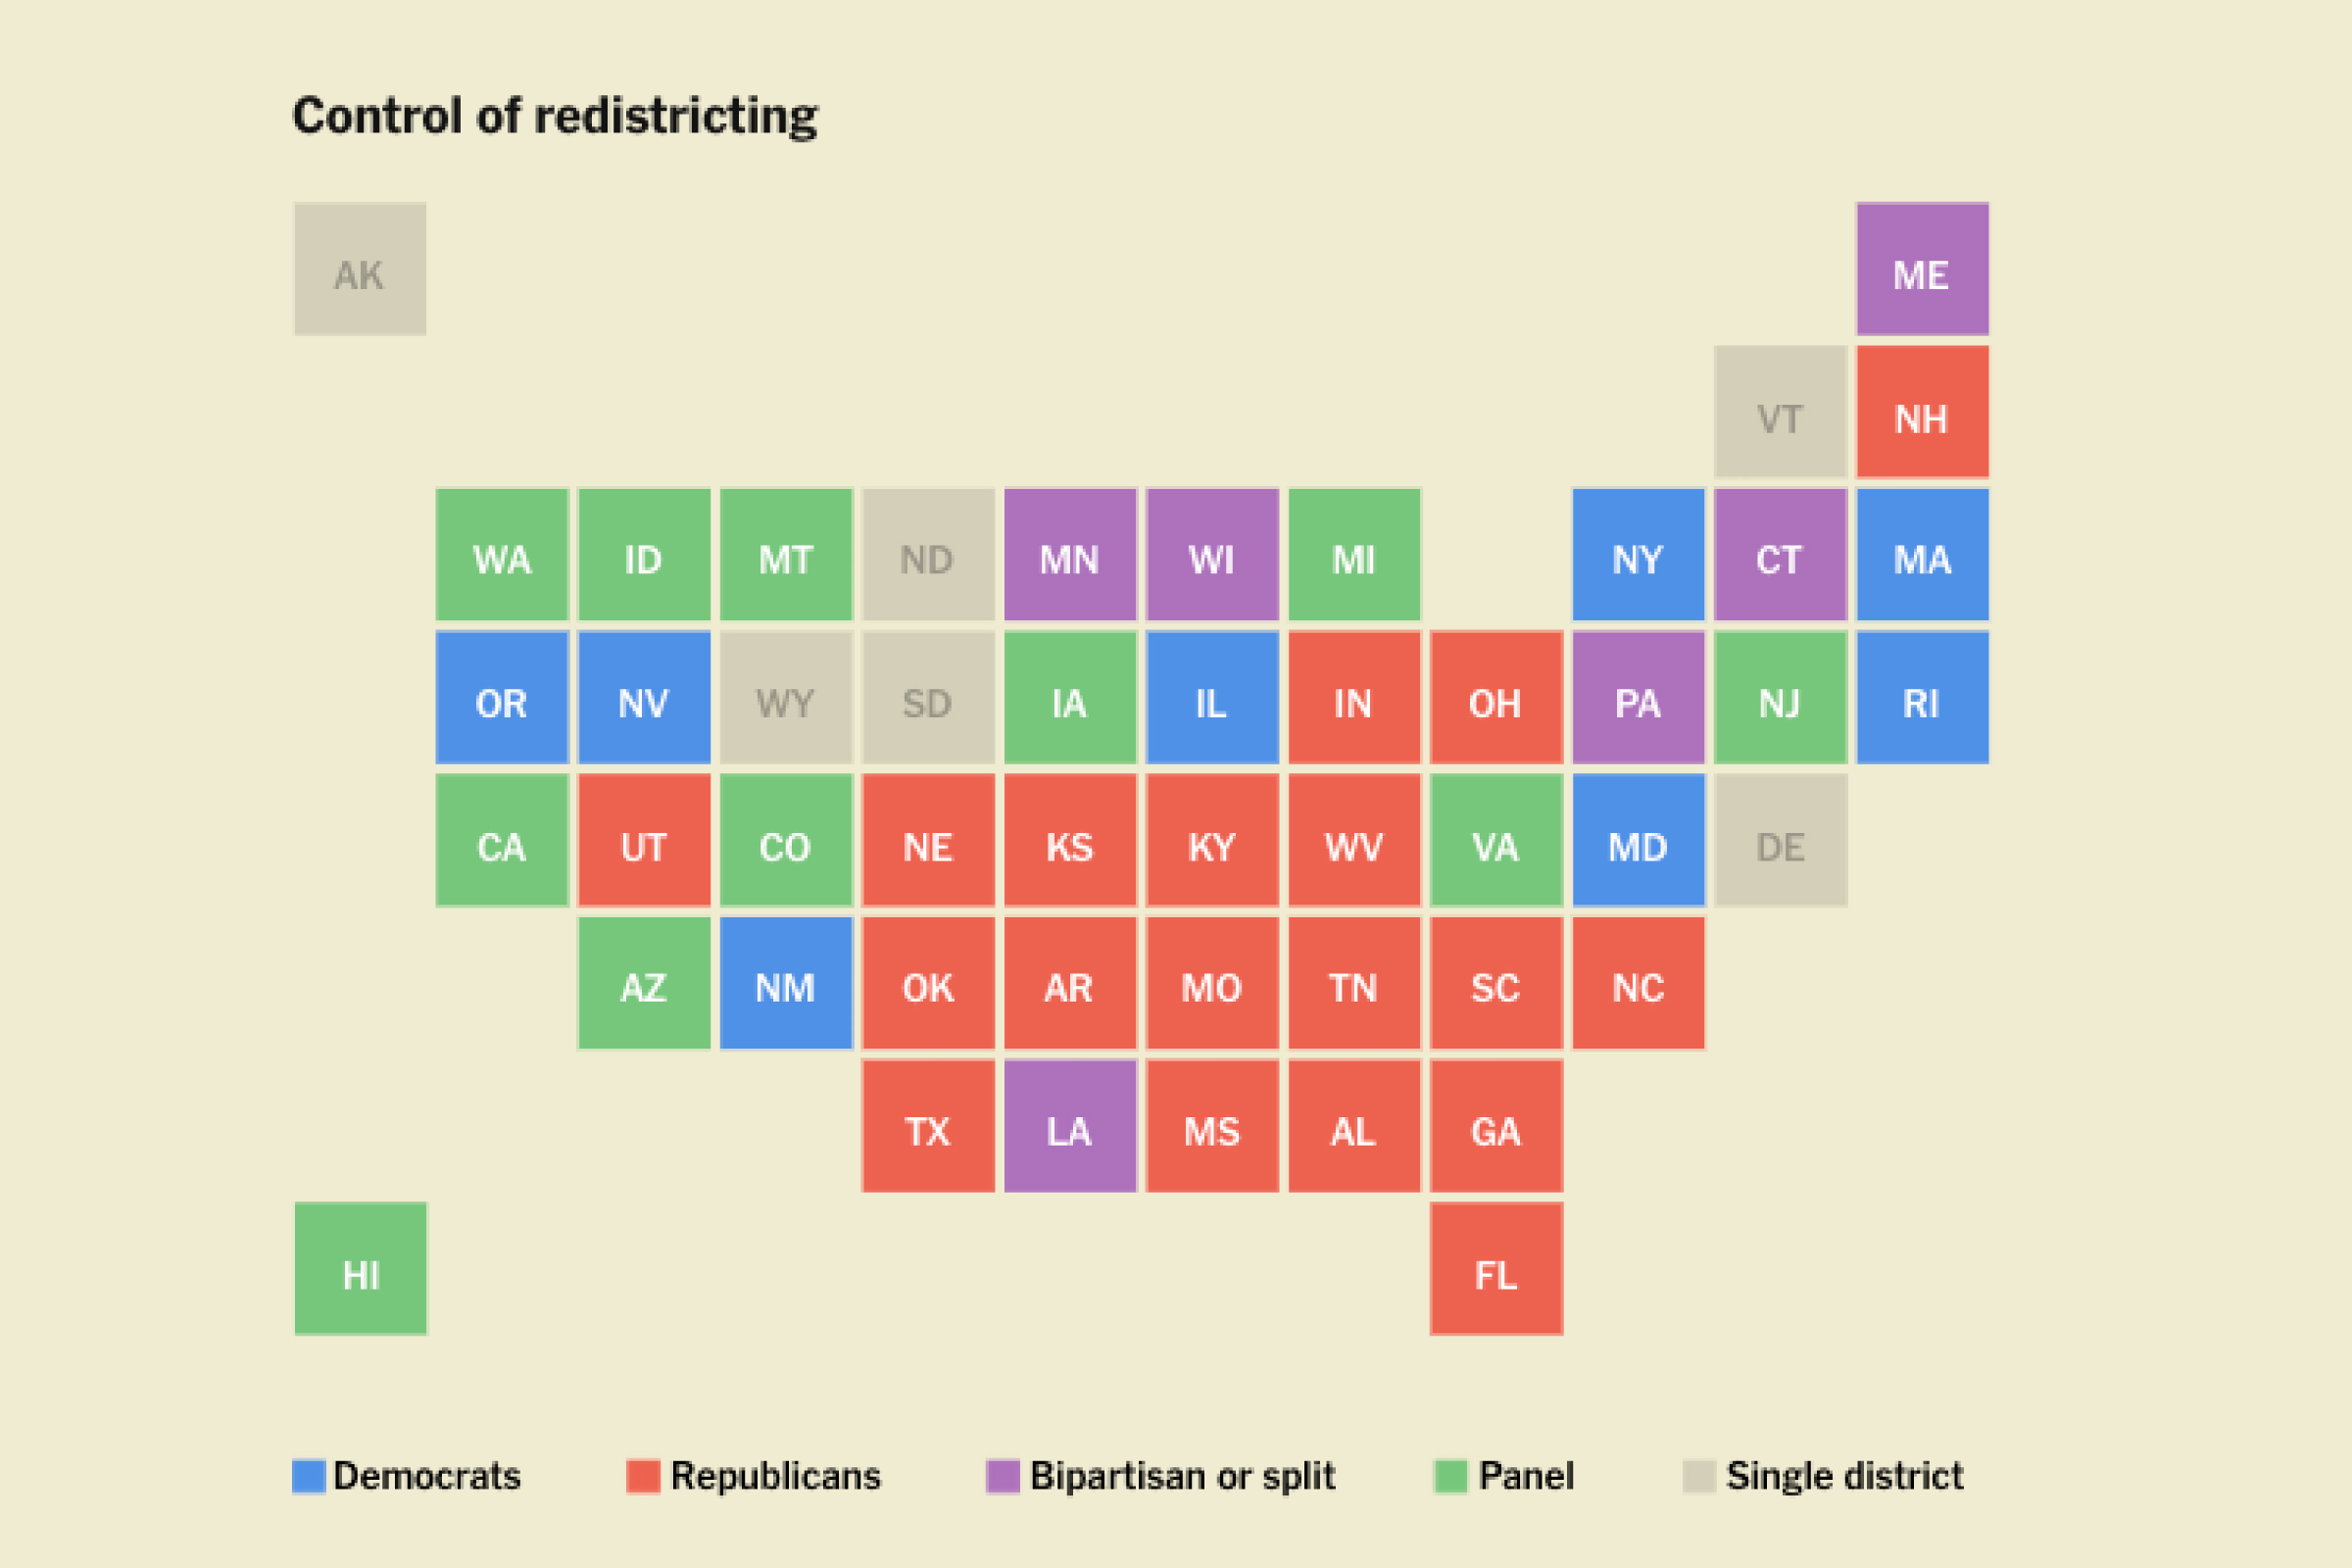 Cartogram representing who is in control of redistricting in each state.